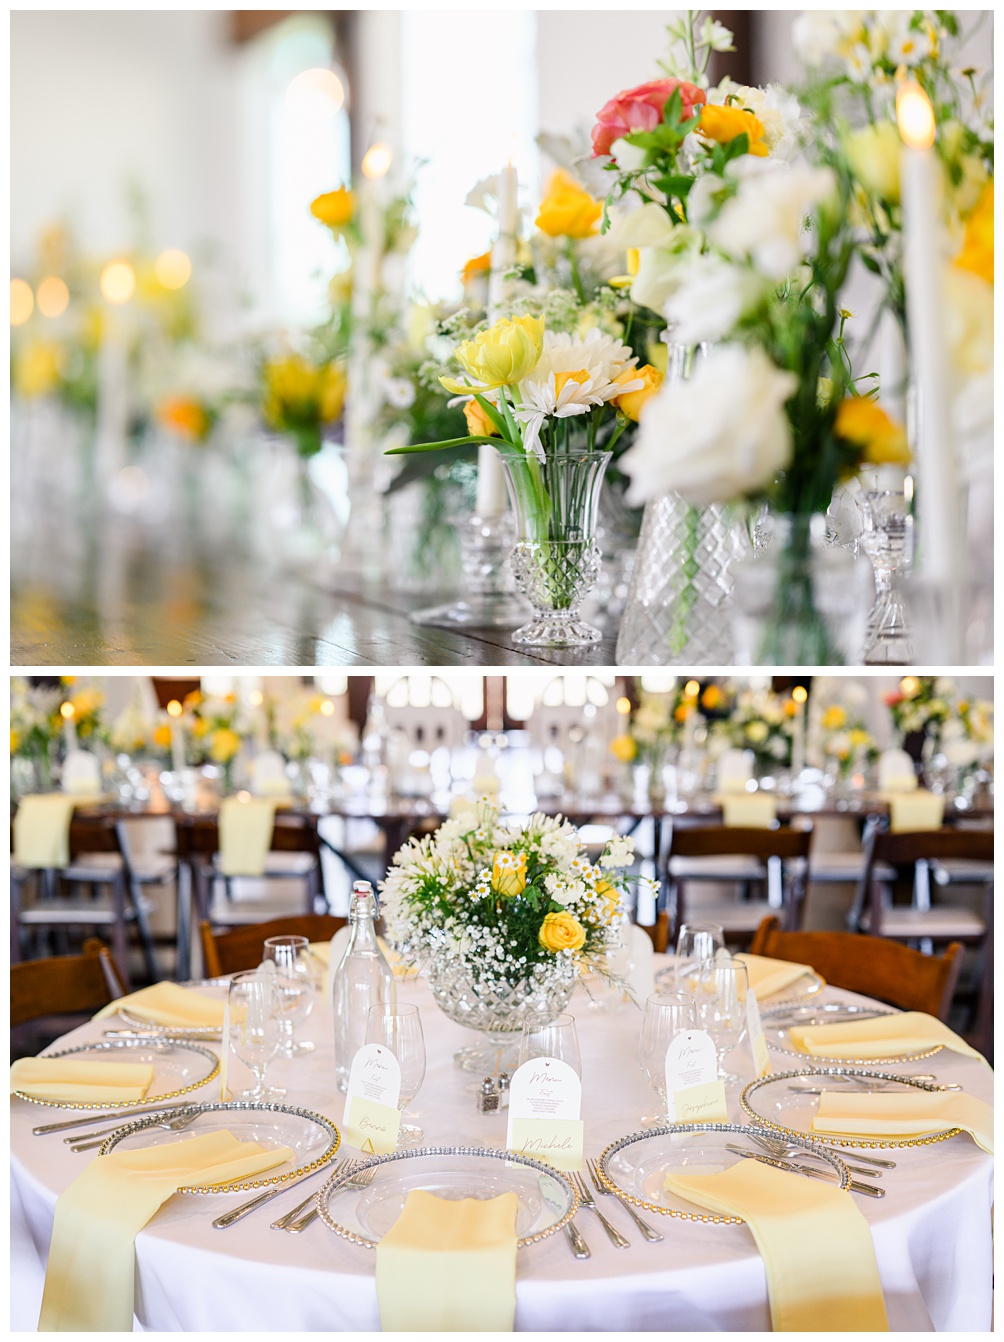 Spring wedding with yellow flowers from the hart florist in texas